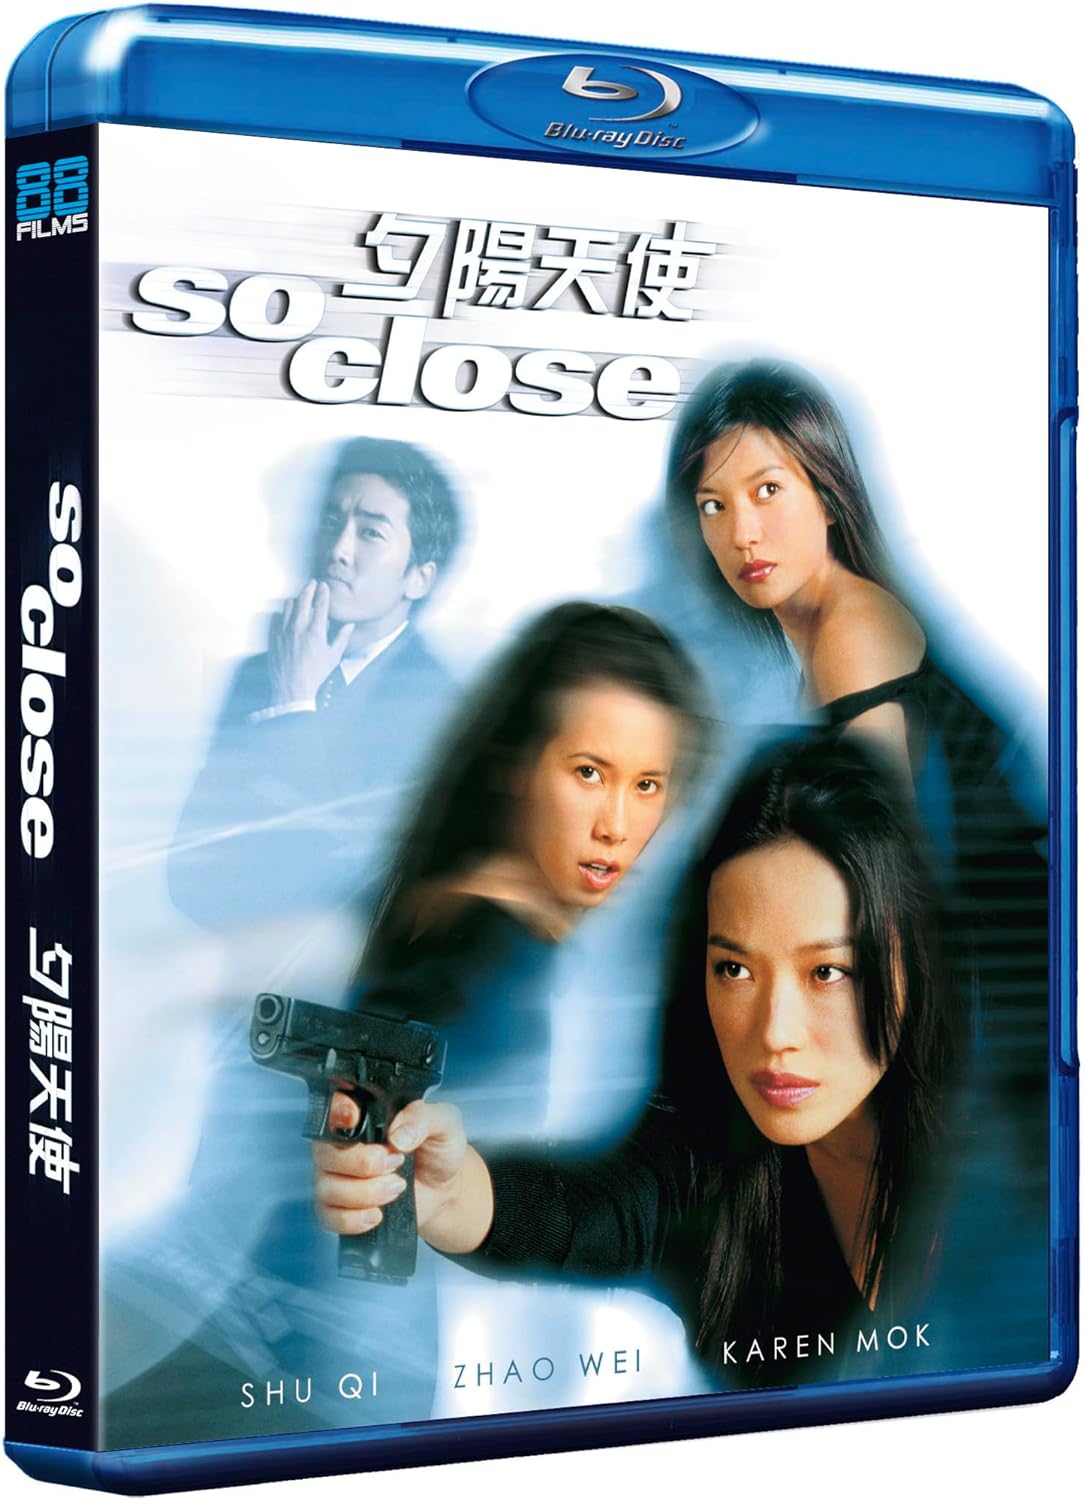 So Close Blu-ray with Slipcover (88 Films/Region B) [Preorder]